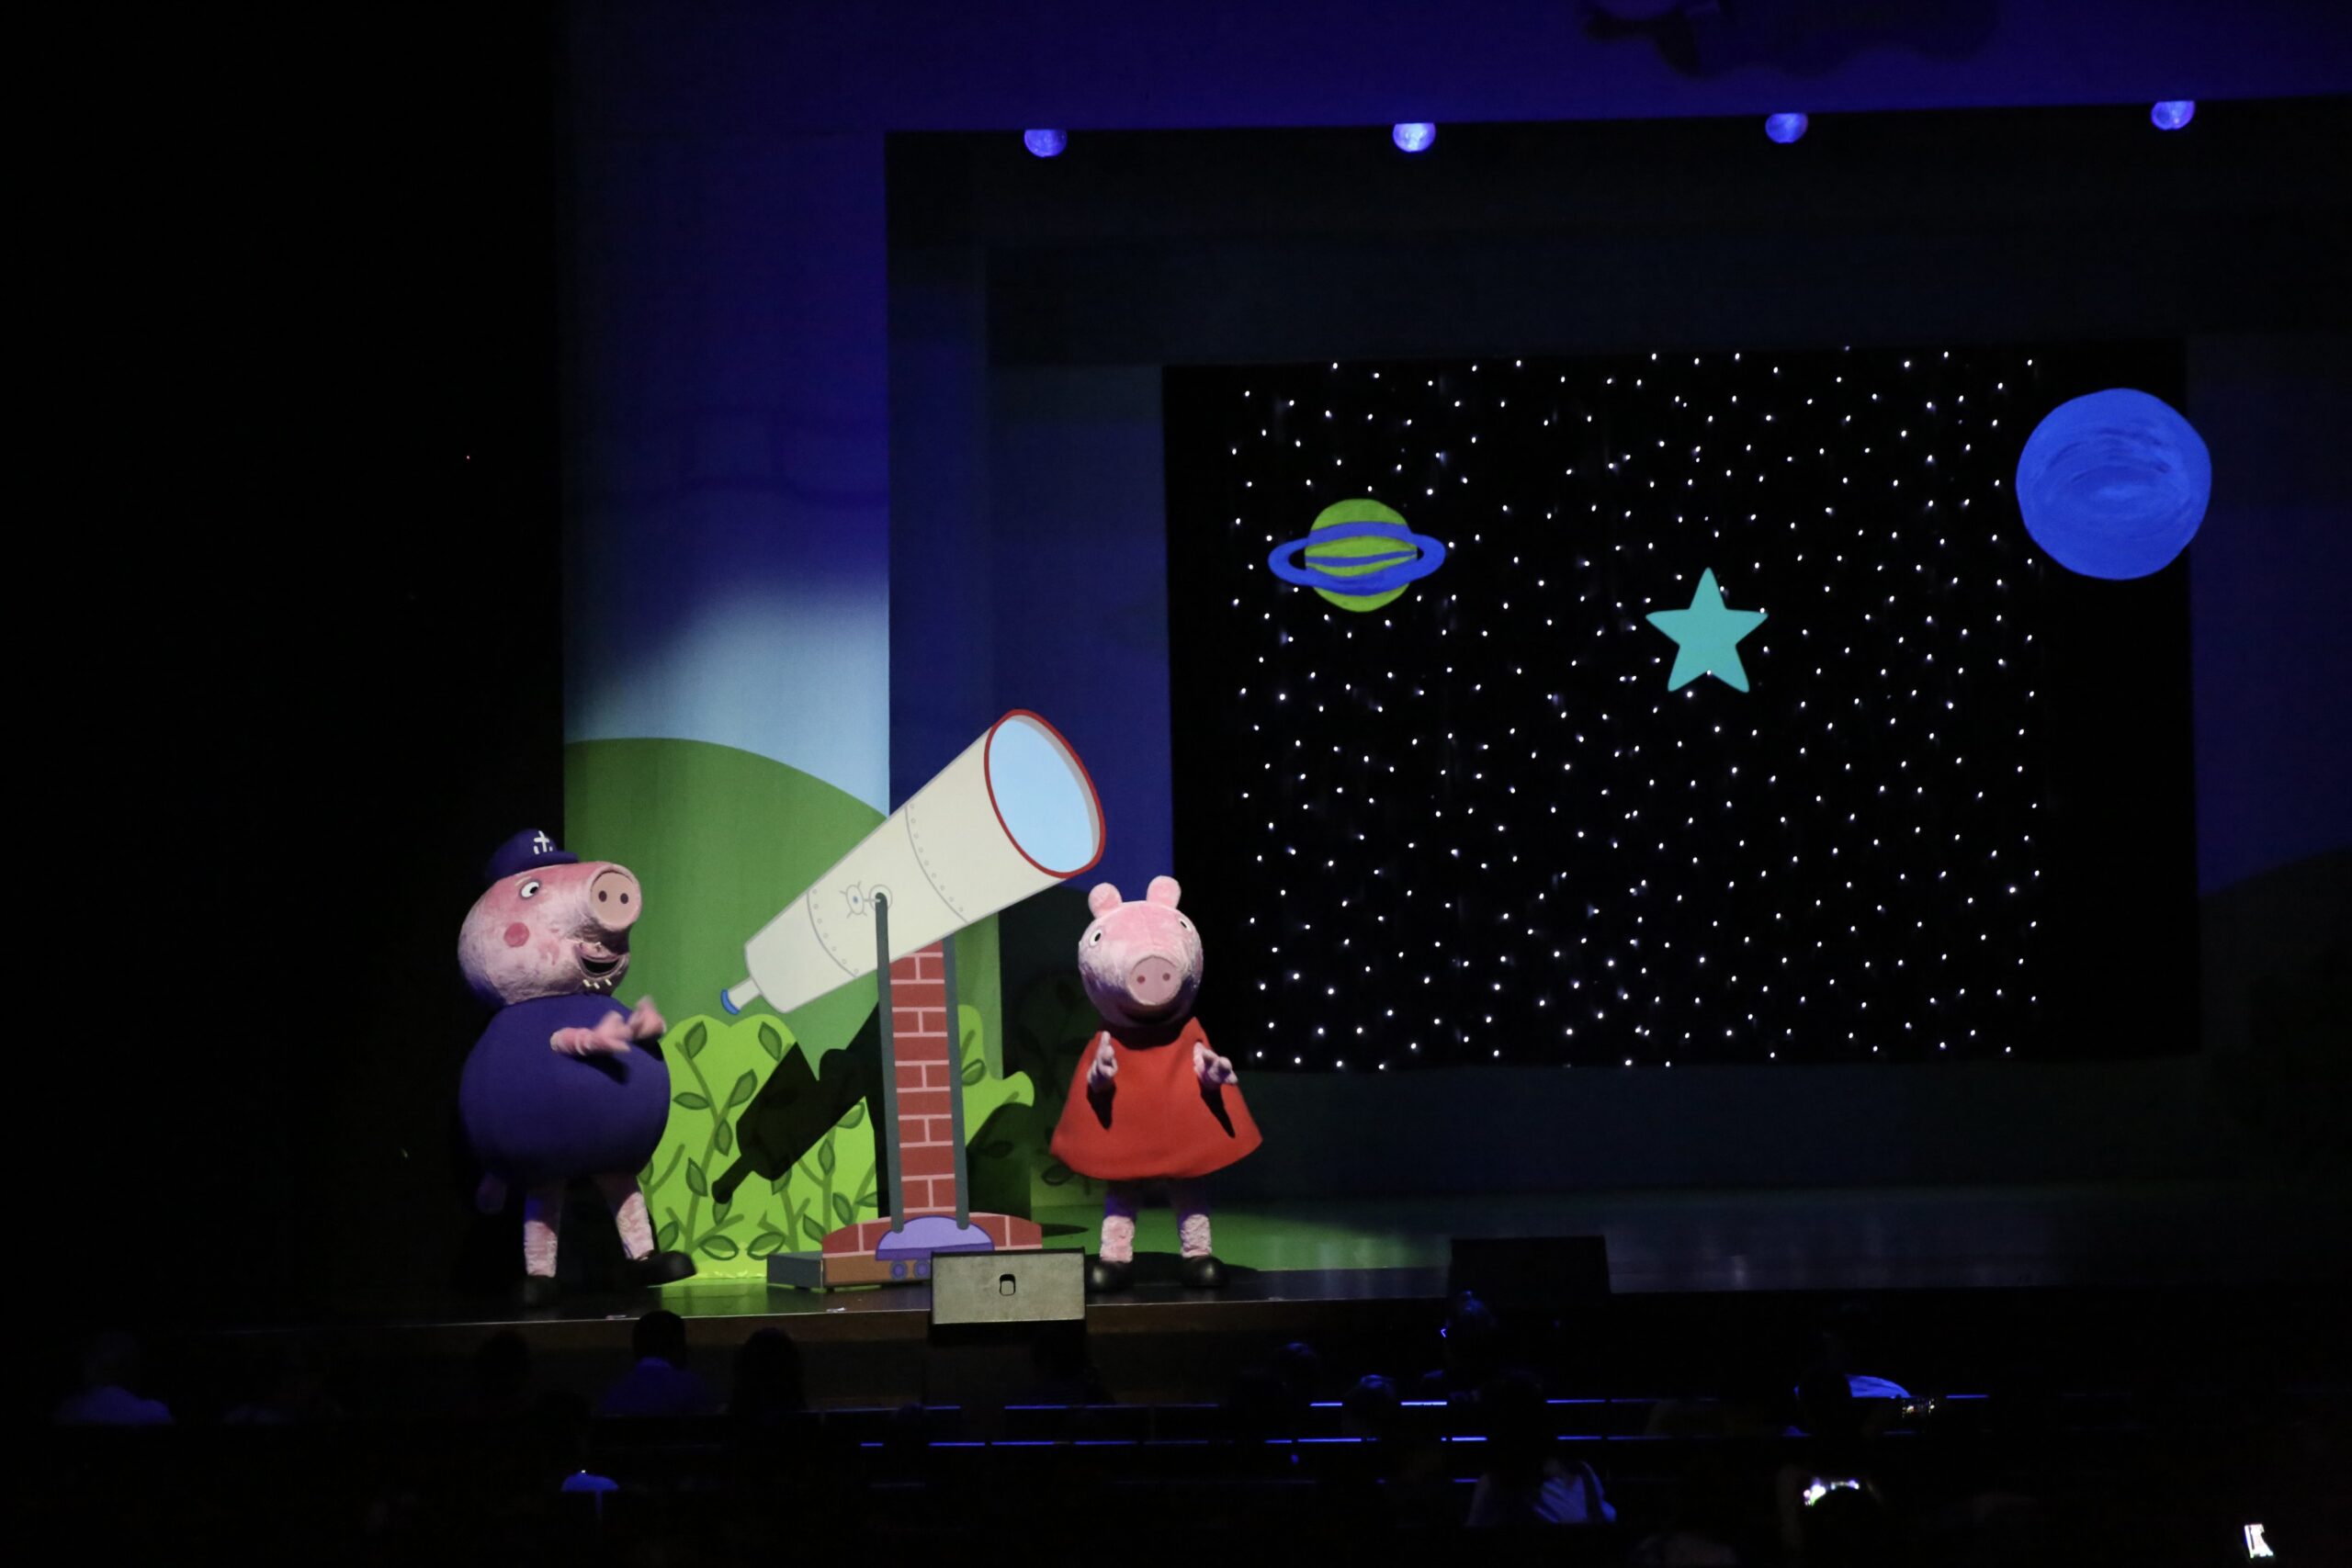 Peppa Pig revisits a memory of when she and Grandpa Pig did some stargazing.